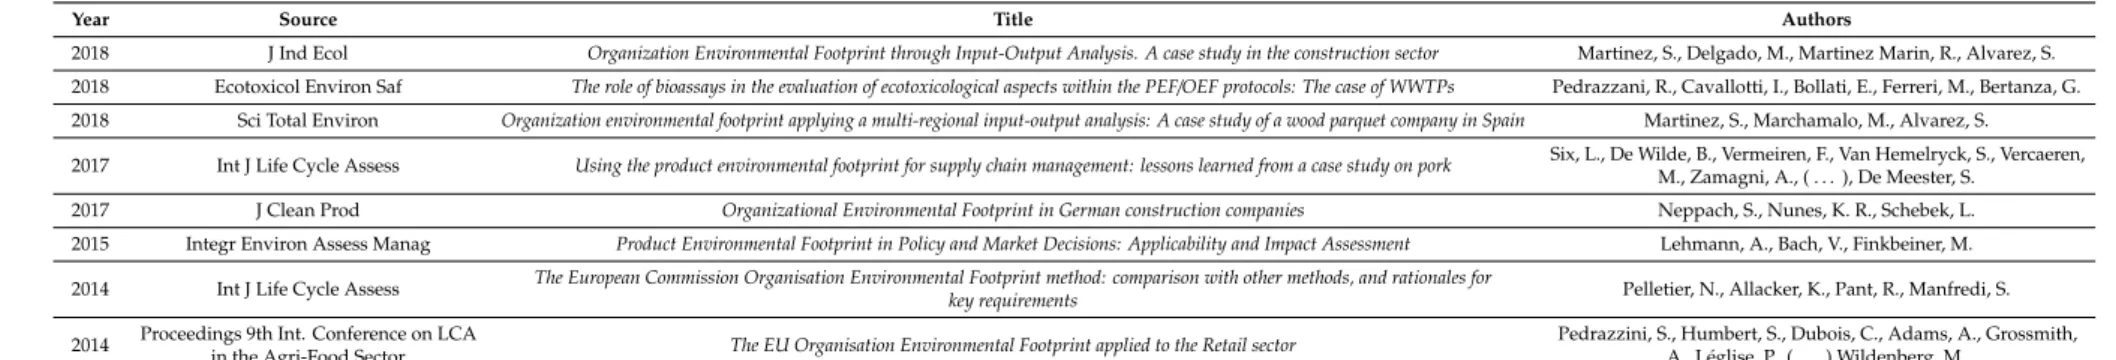 Table 1. Scientific articles related to the Organisation Environmental Footprint (OEF).